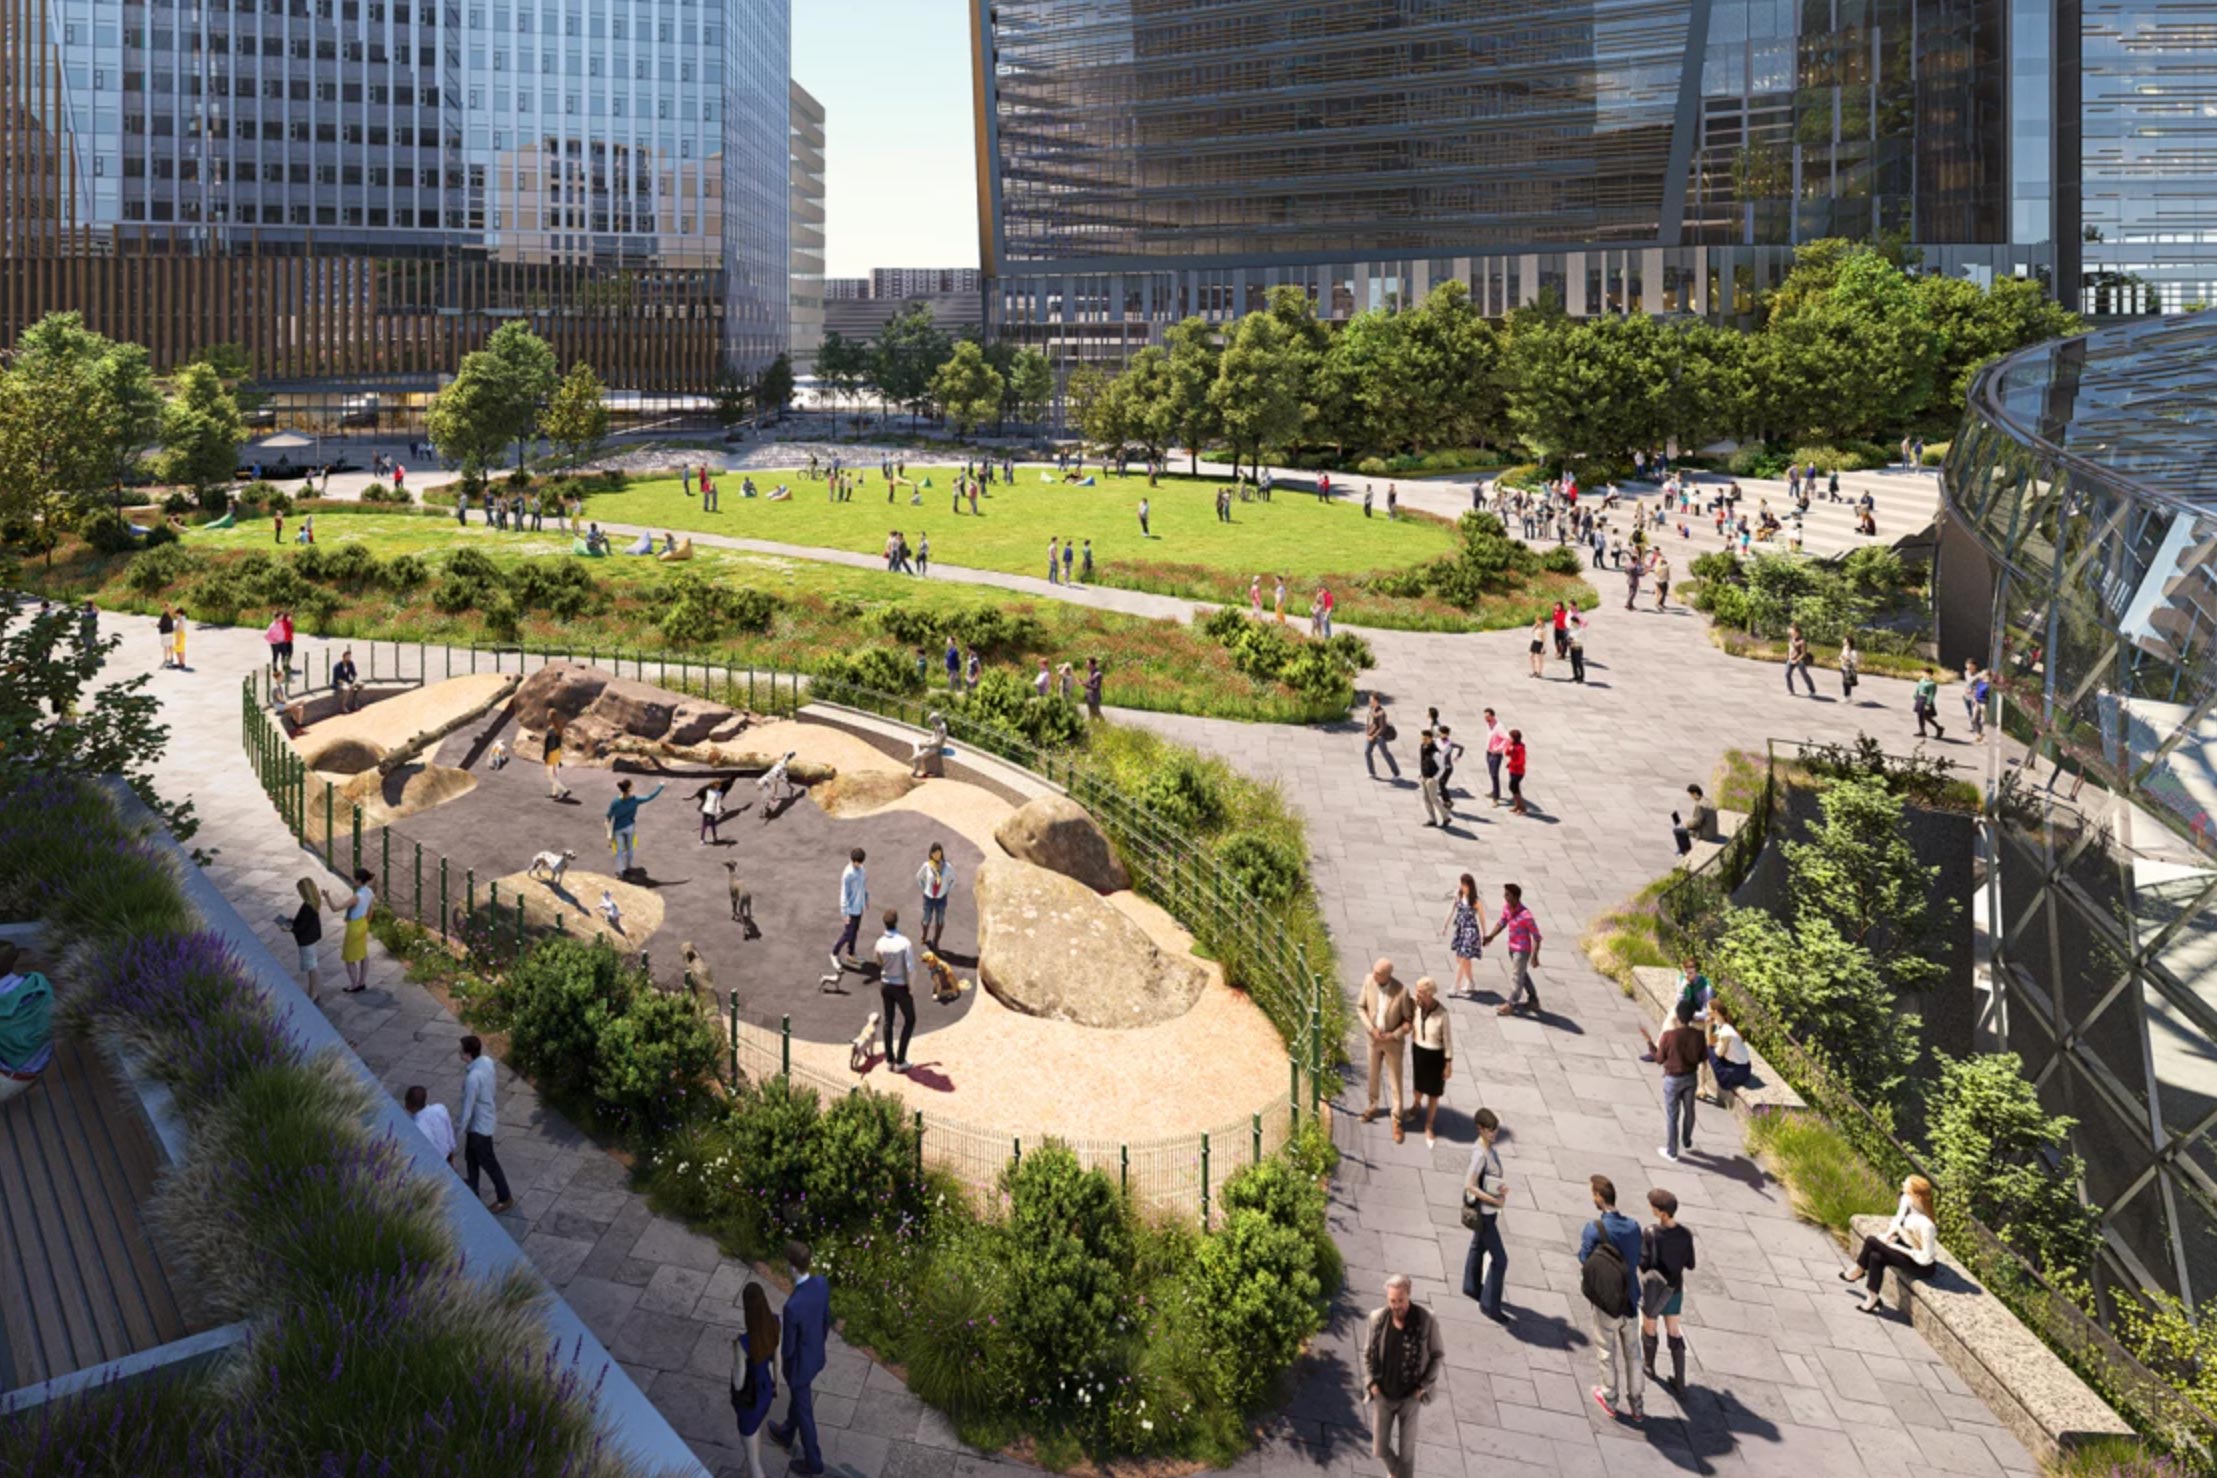 The plans also call for 2.5 acres of green space open to the public and neighborhood features like a dog run and an amphitheater. (Image: NBBJ, Amazon)